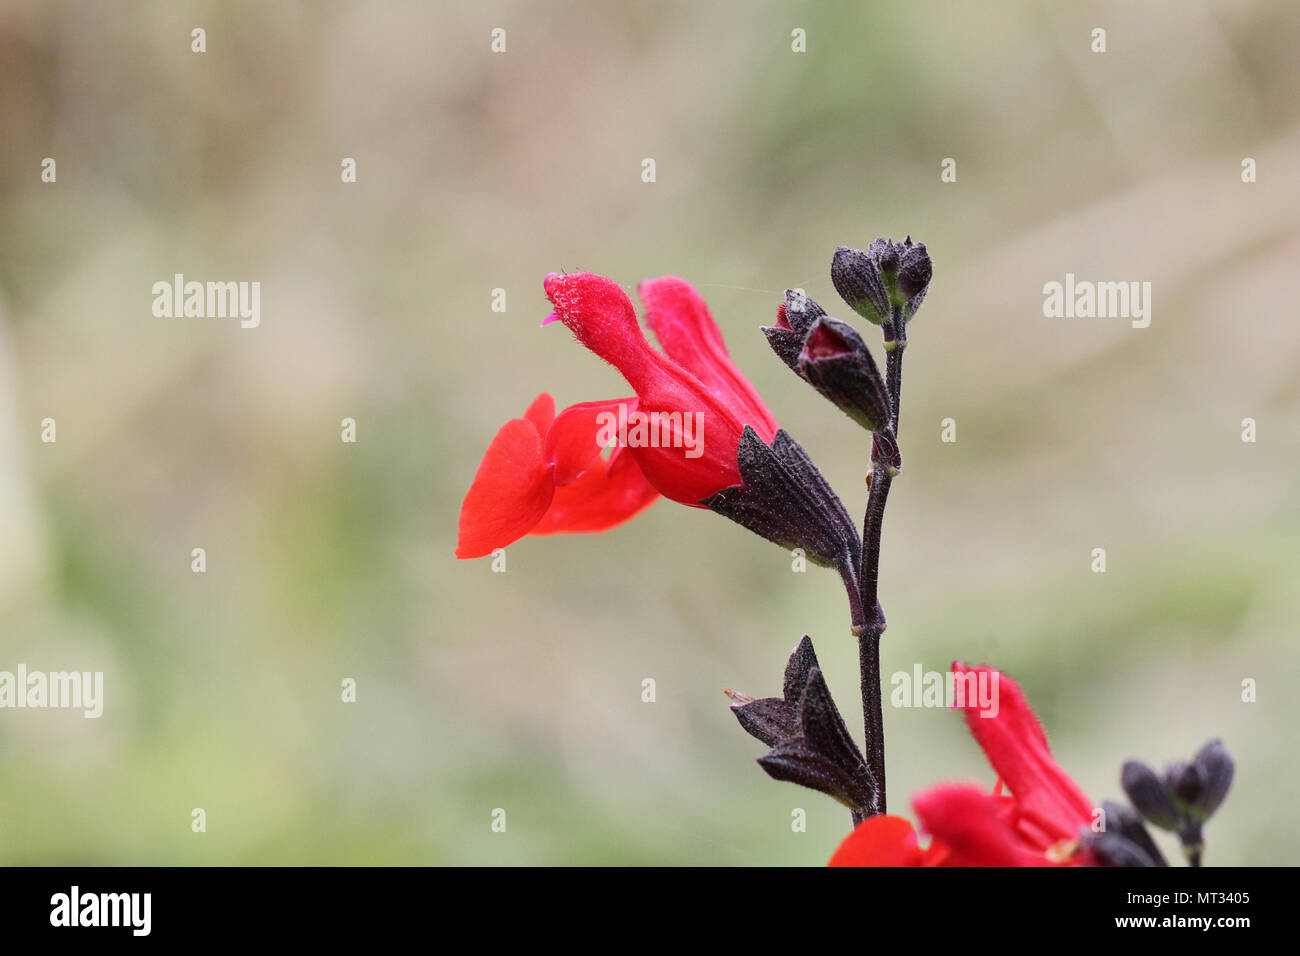 Scarlet flowering sage royal bumble or salvia x jamensis close to blooming in Italy in springtime Stock Photo